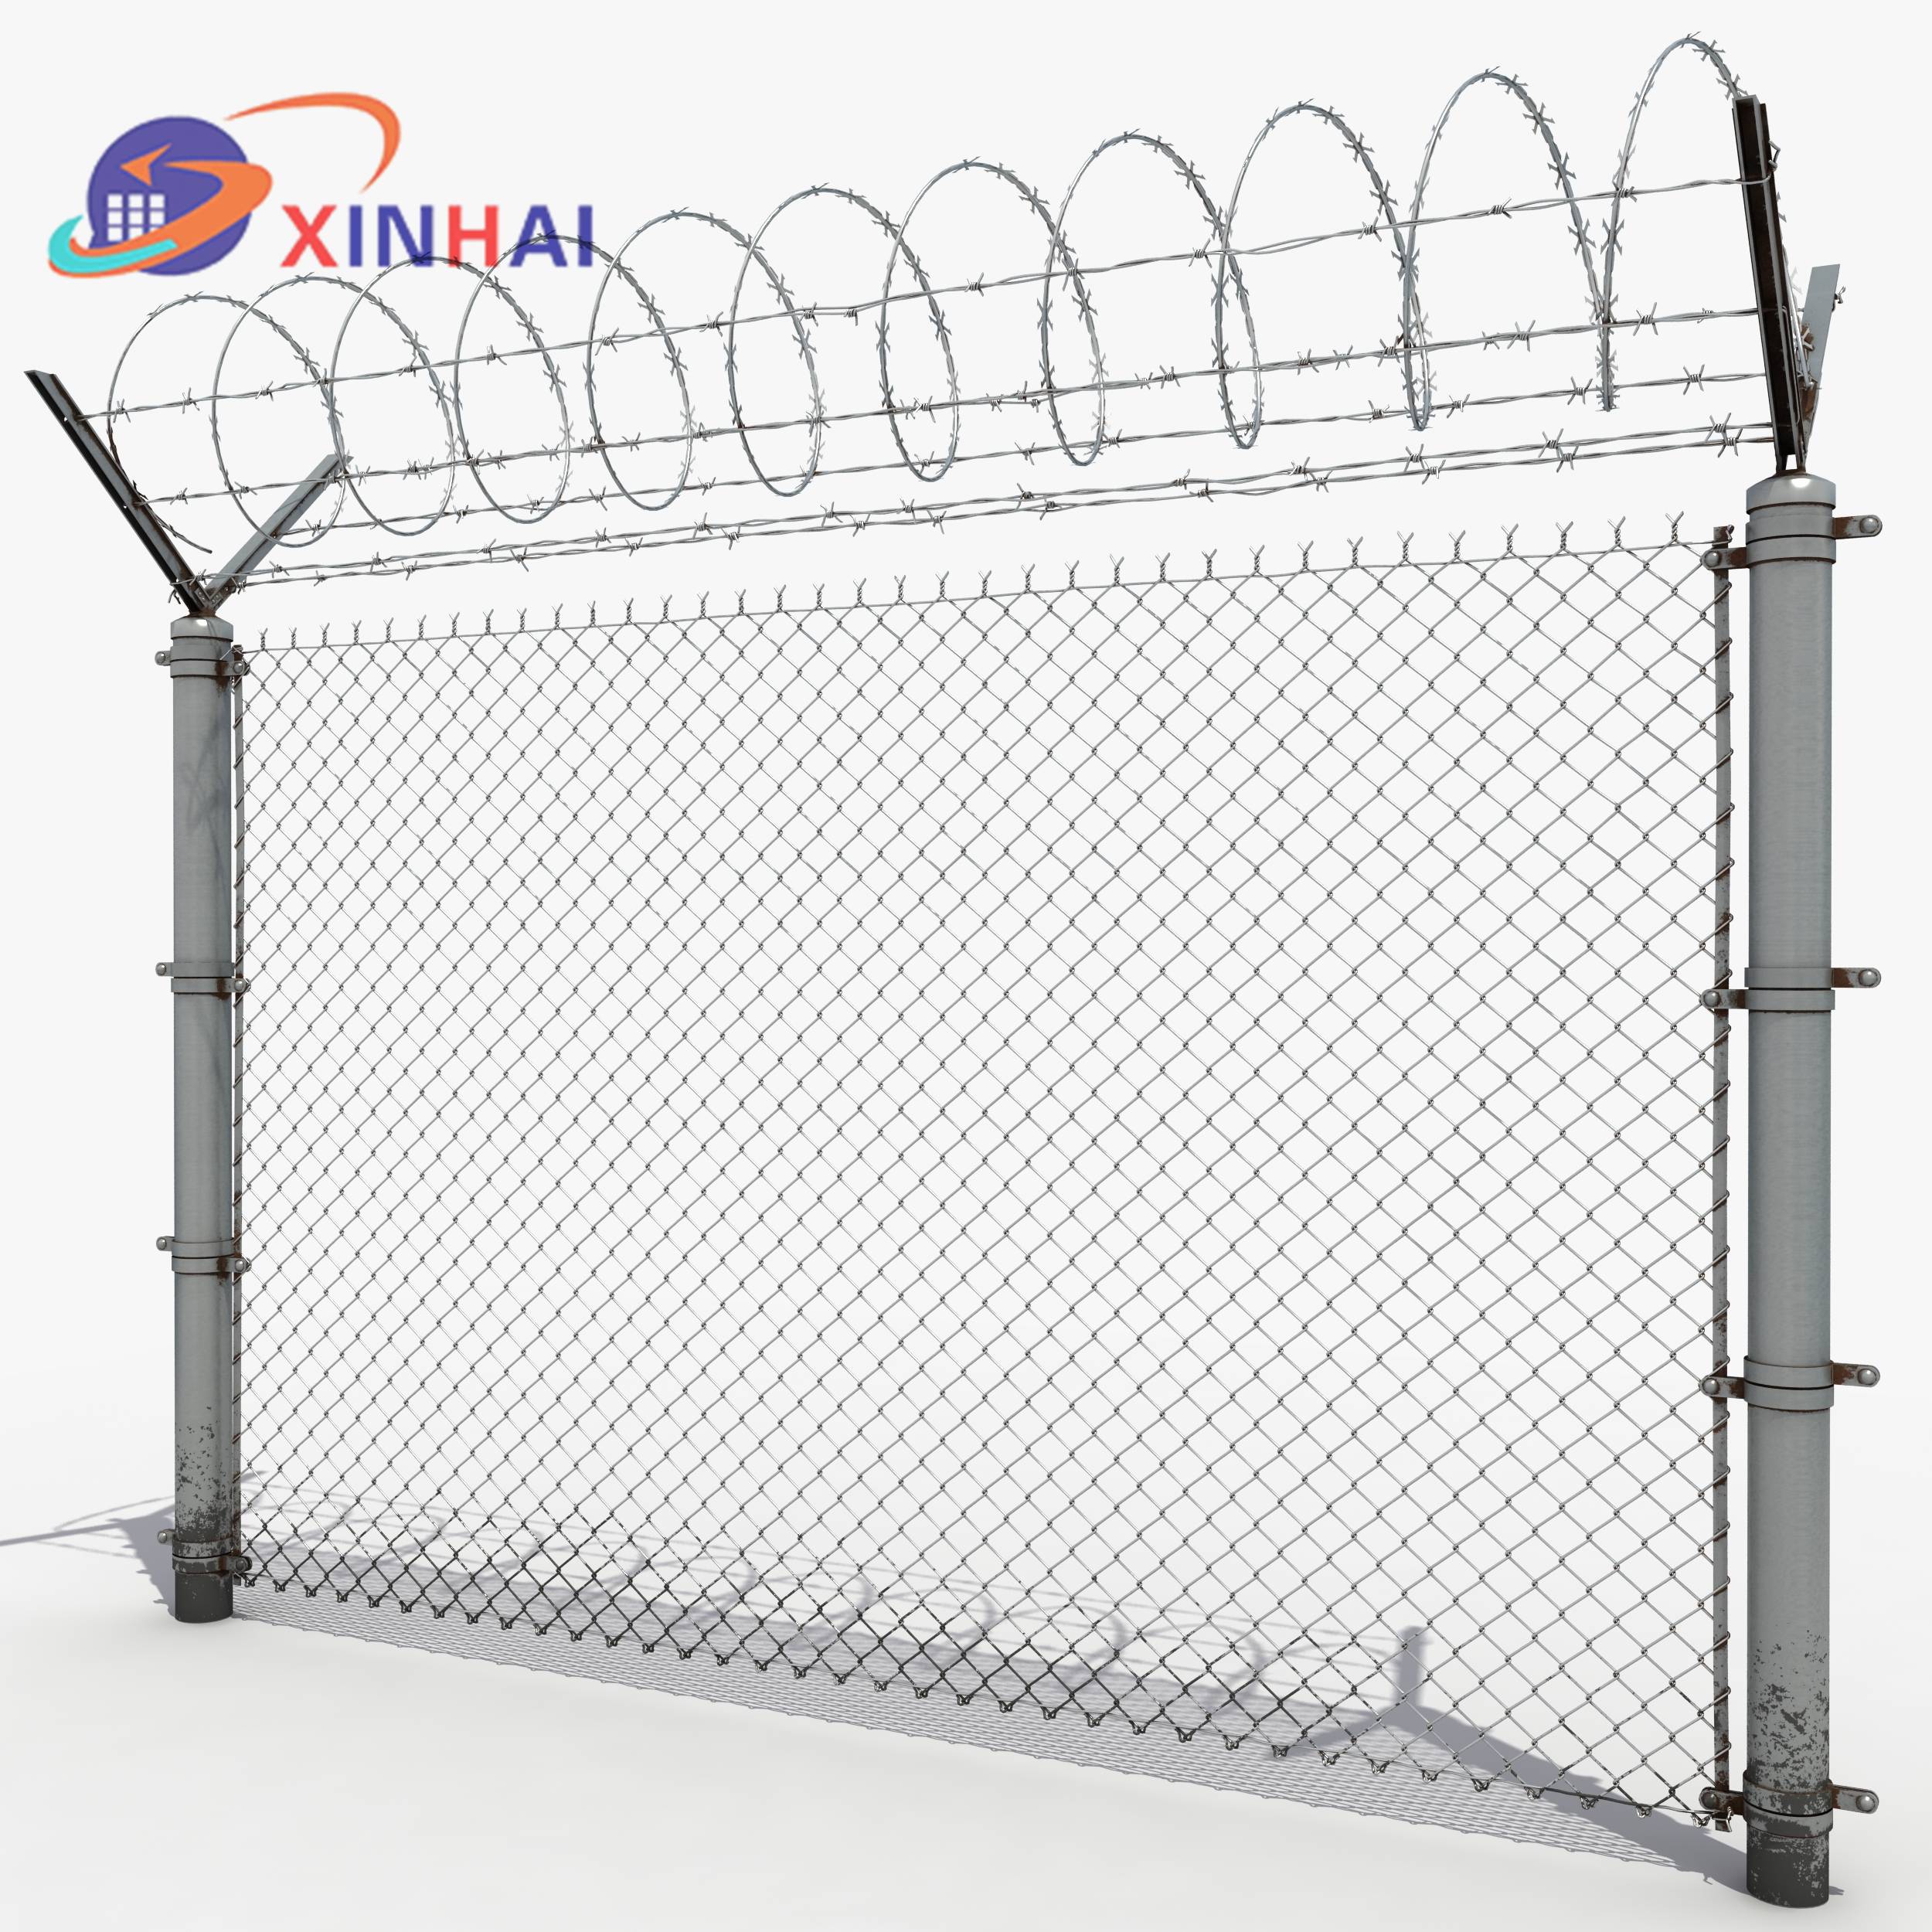 Special Design for Crowd Control Barrier Plastic -
 Airport fence  – Xinhai